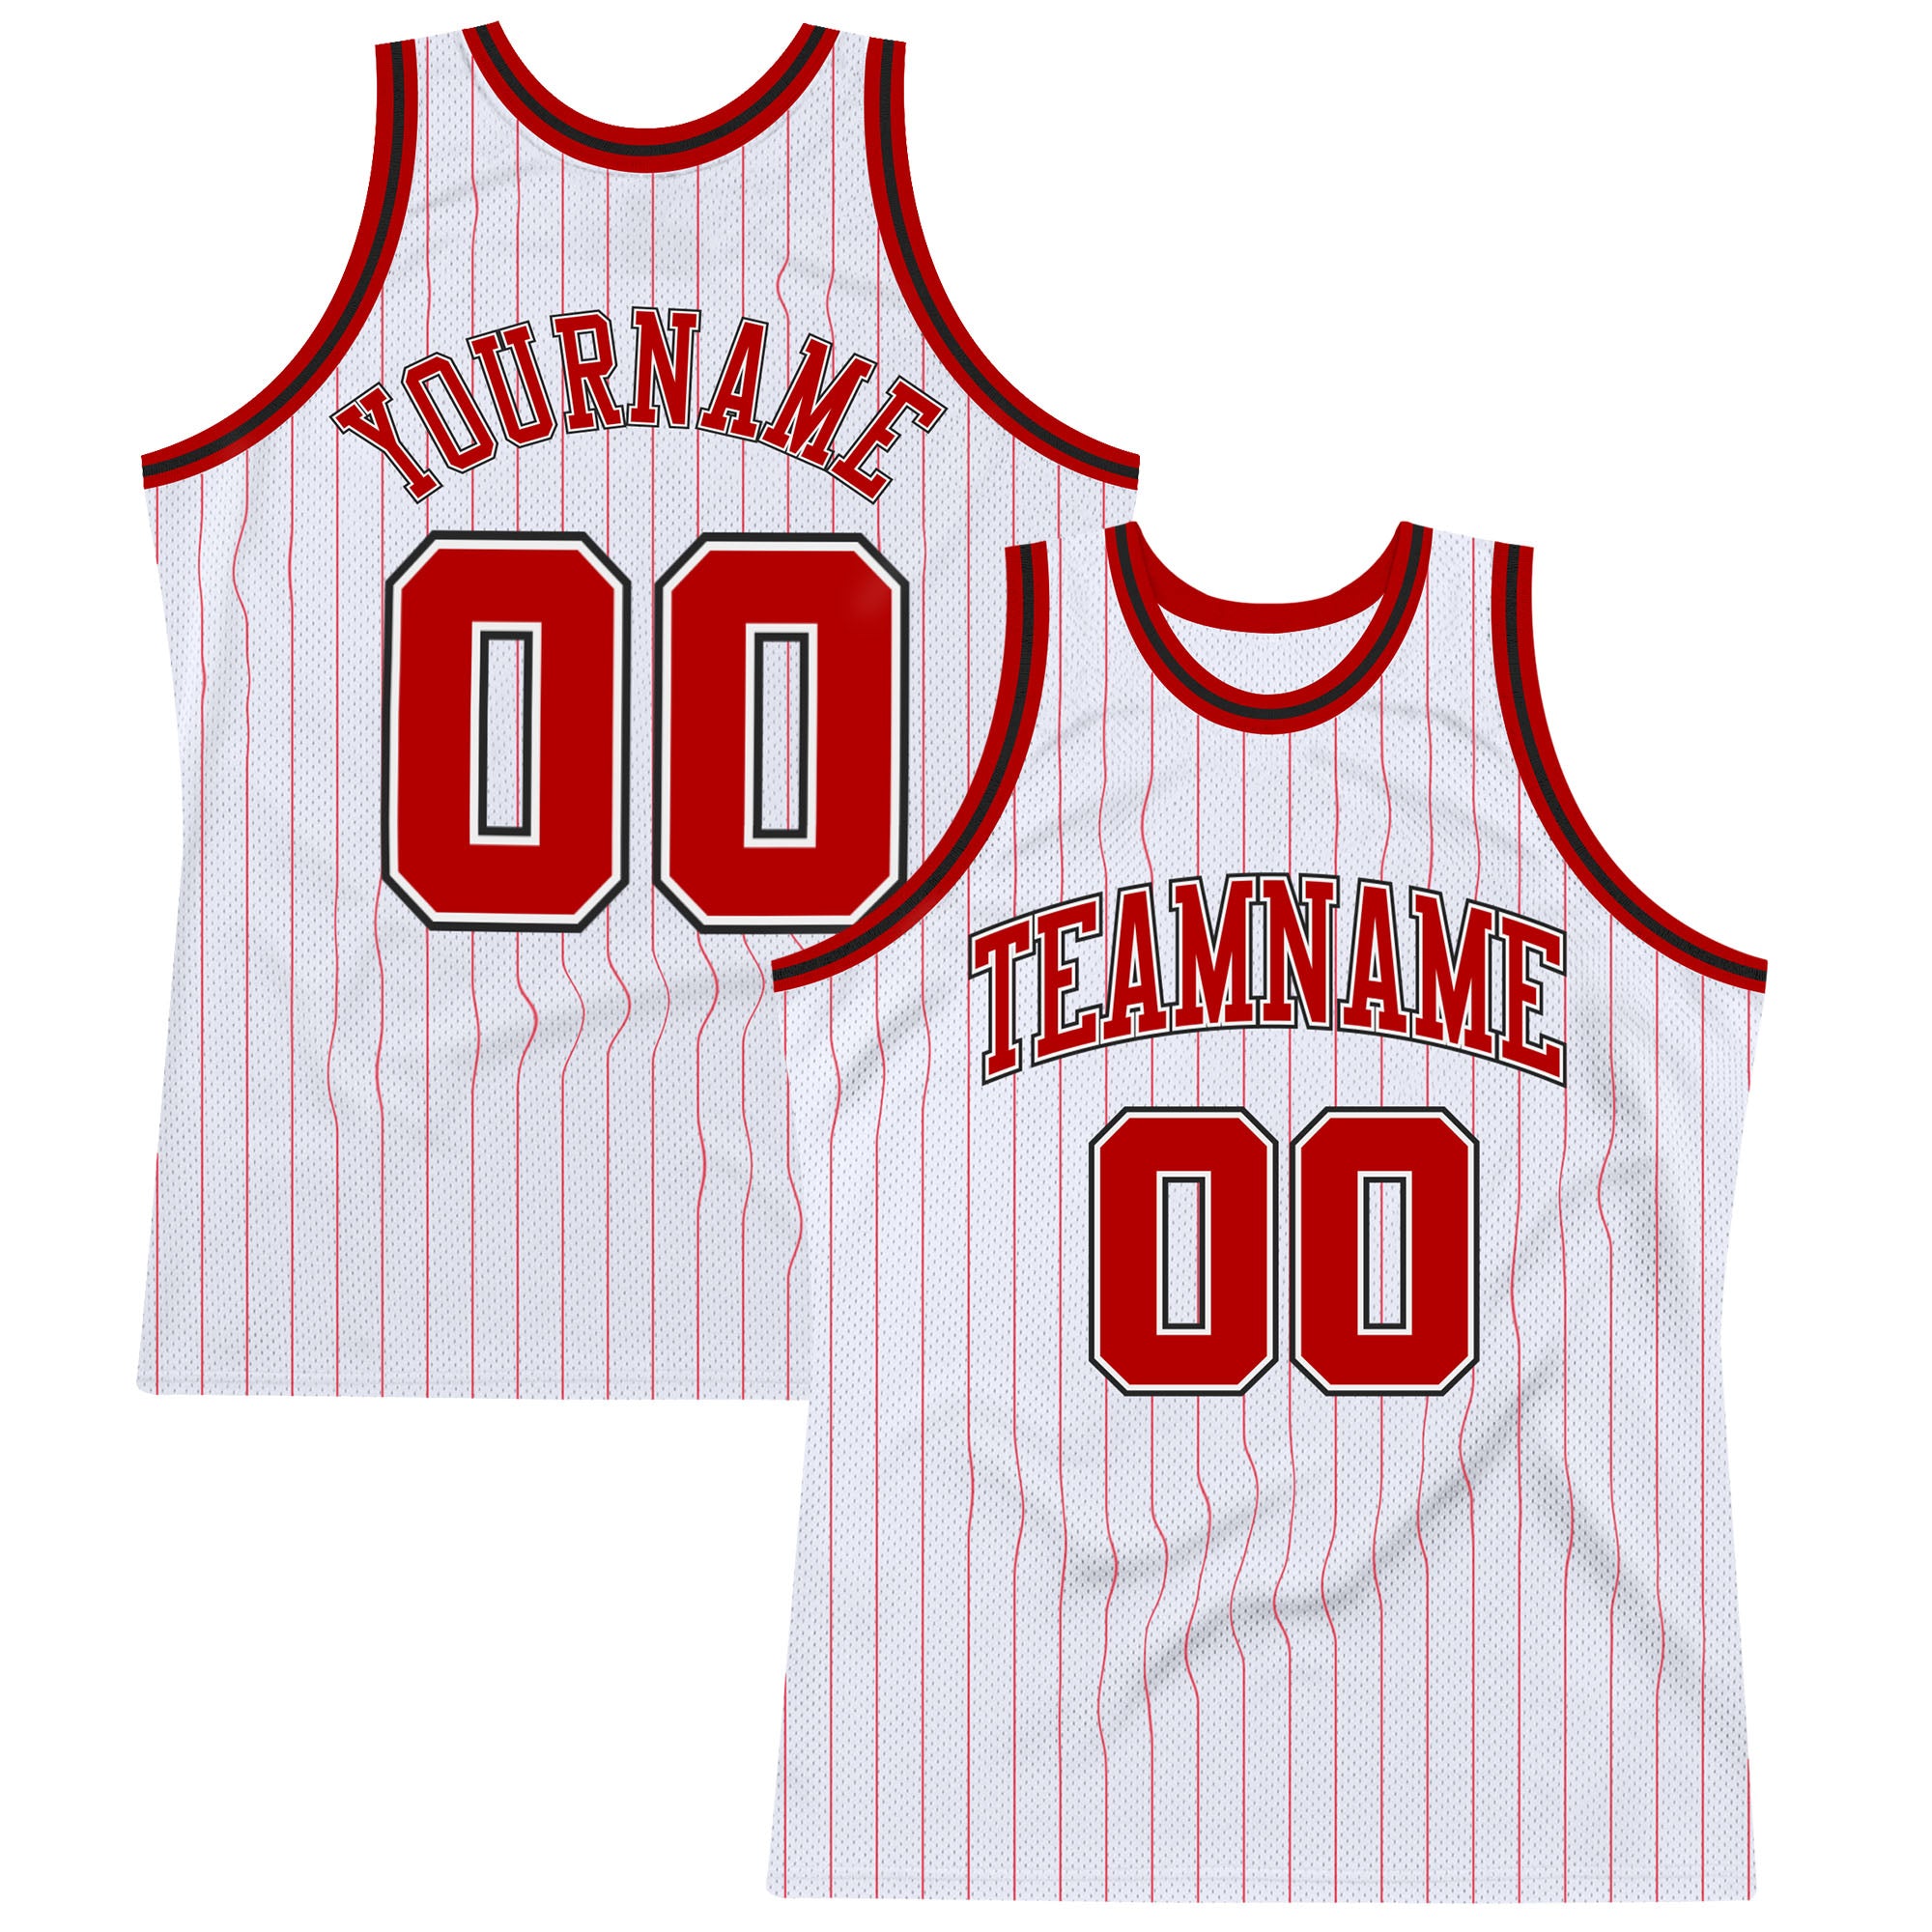 Cheap Custom Red White Pinstripe Black-Old Gold Authentic Basketball Jersey  Free Shipping – CustomJerseysPro